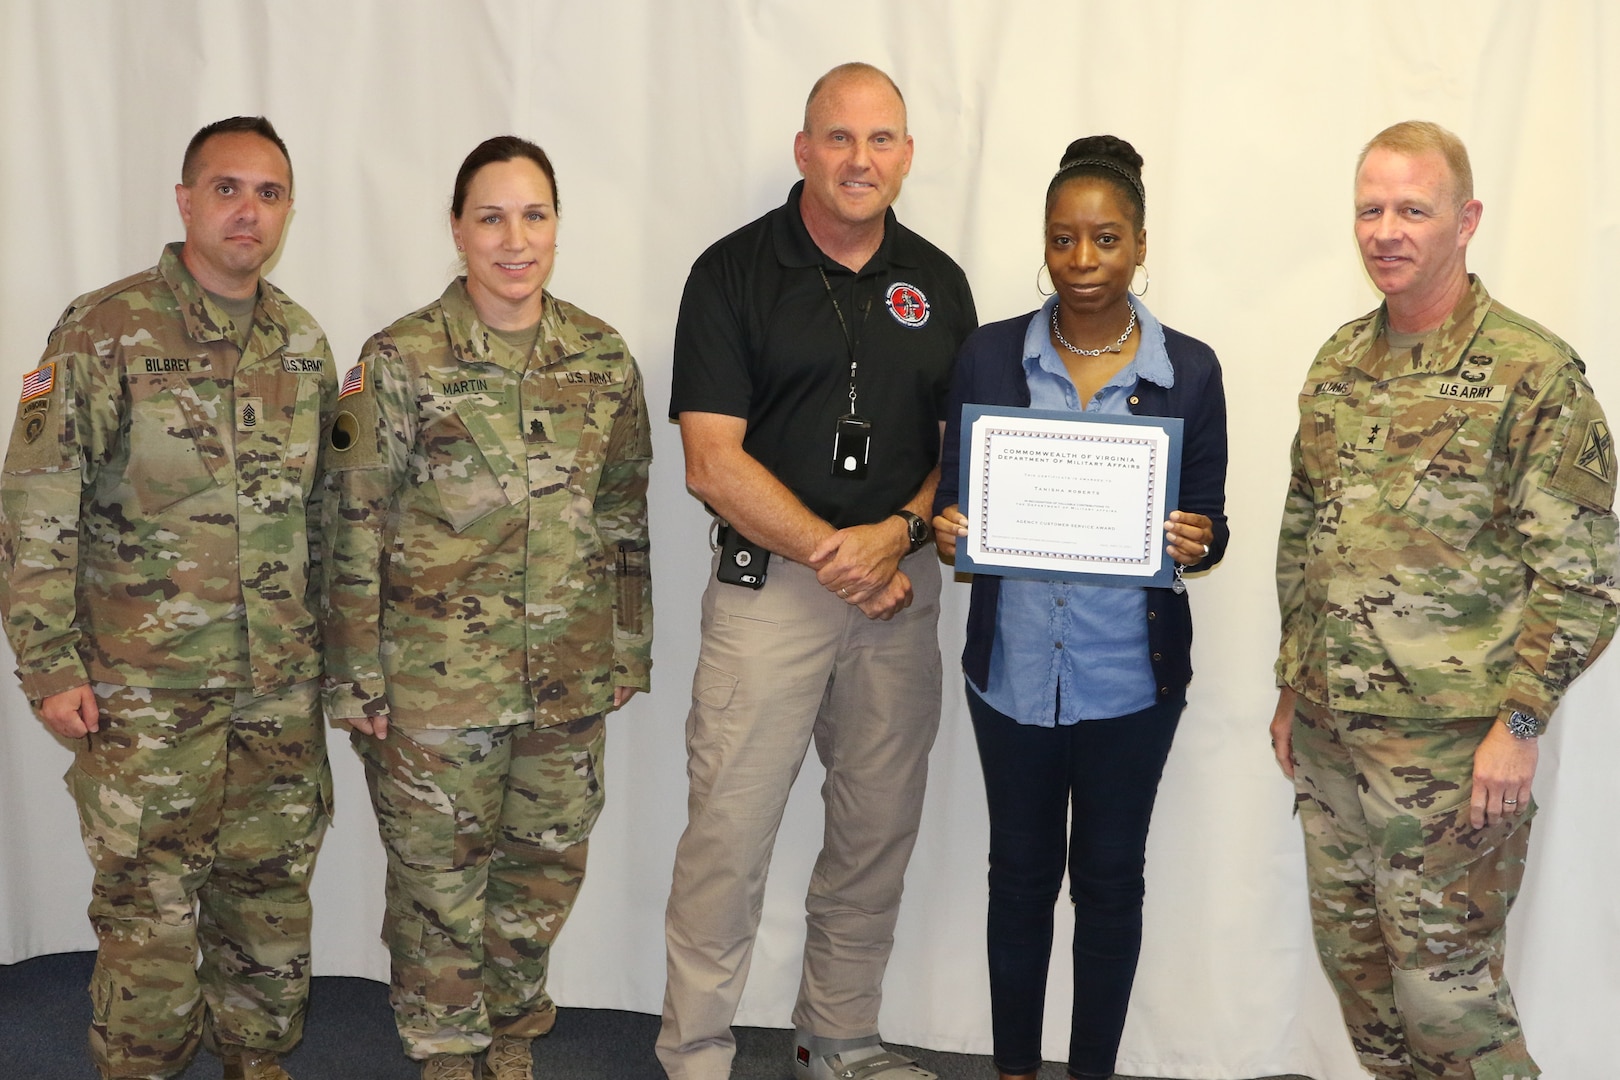 DMA employees recognized for outstanding job performance